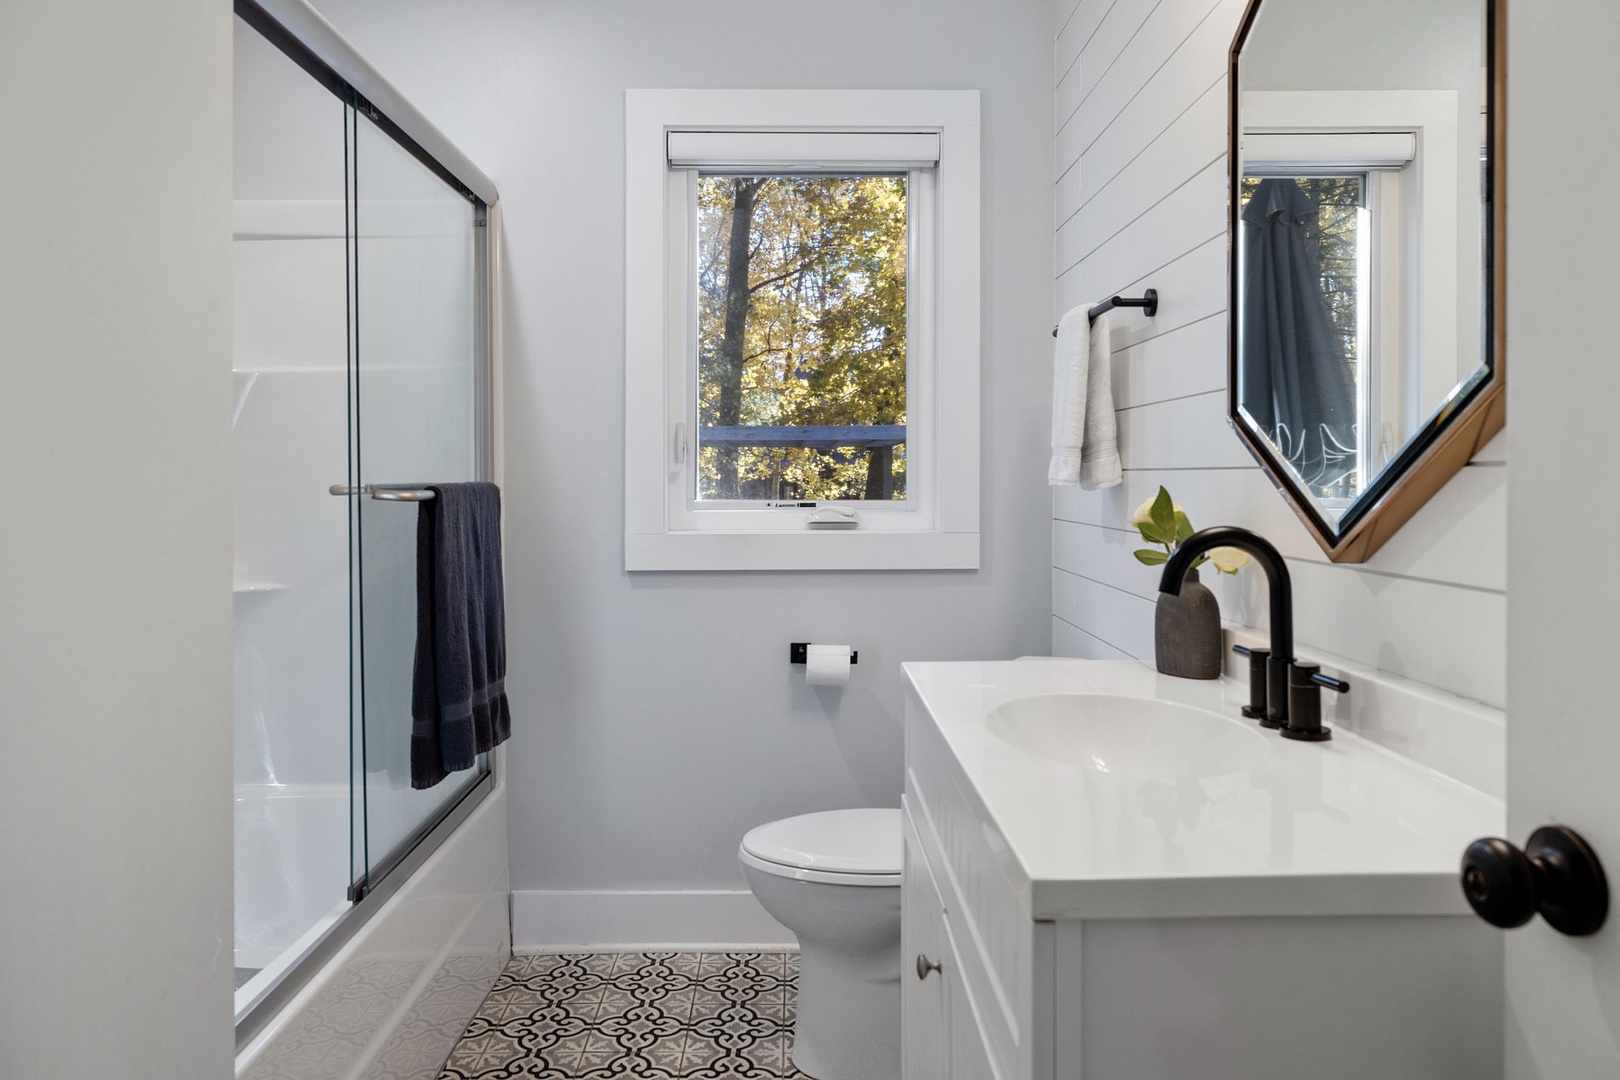 First-class fixtures and vanities are featured in every bathroom.